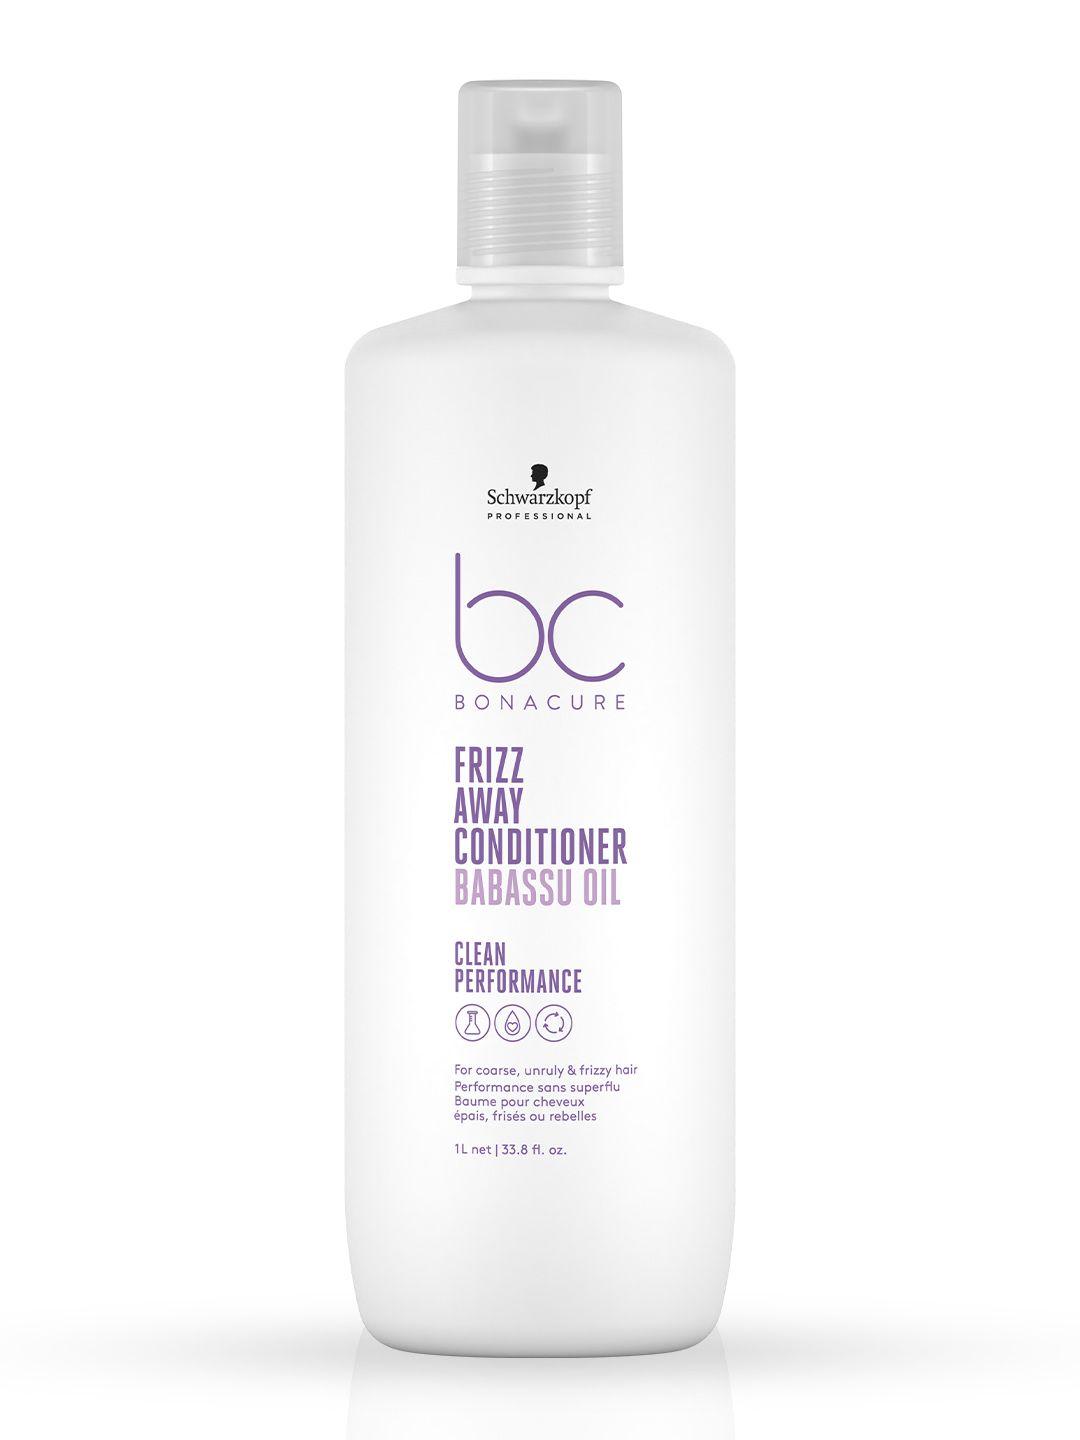 schwarzkopf professional bonacure frizz away conditioner with babassu oil for dry hair-1l